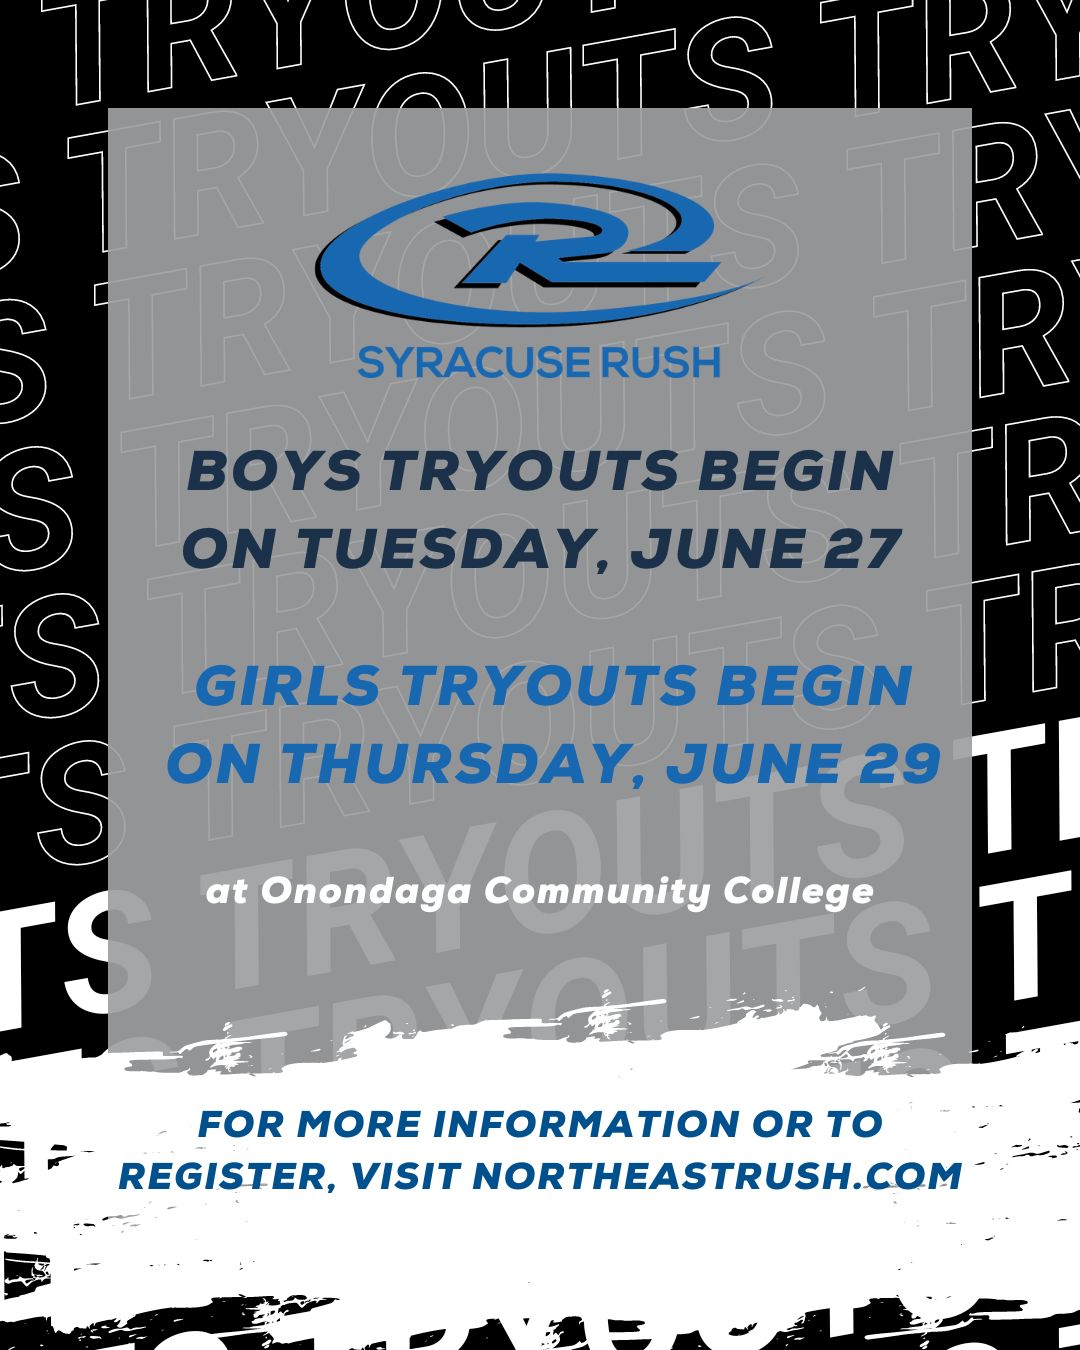 Soccer Camps and Tryouts for Rush